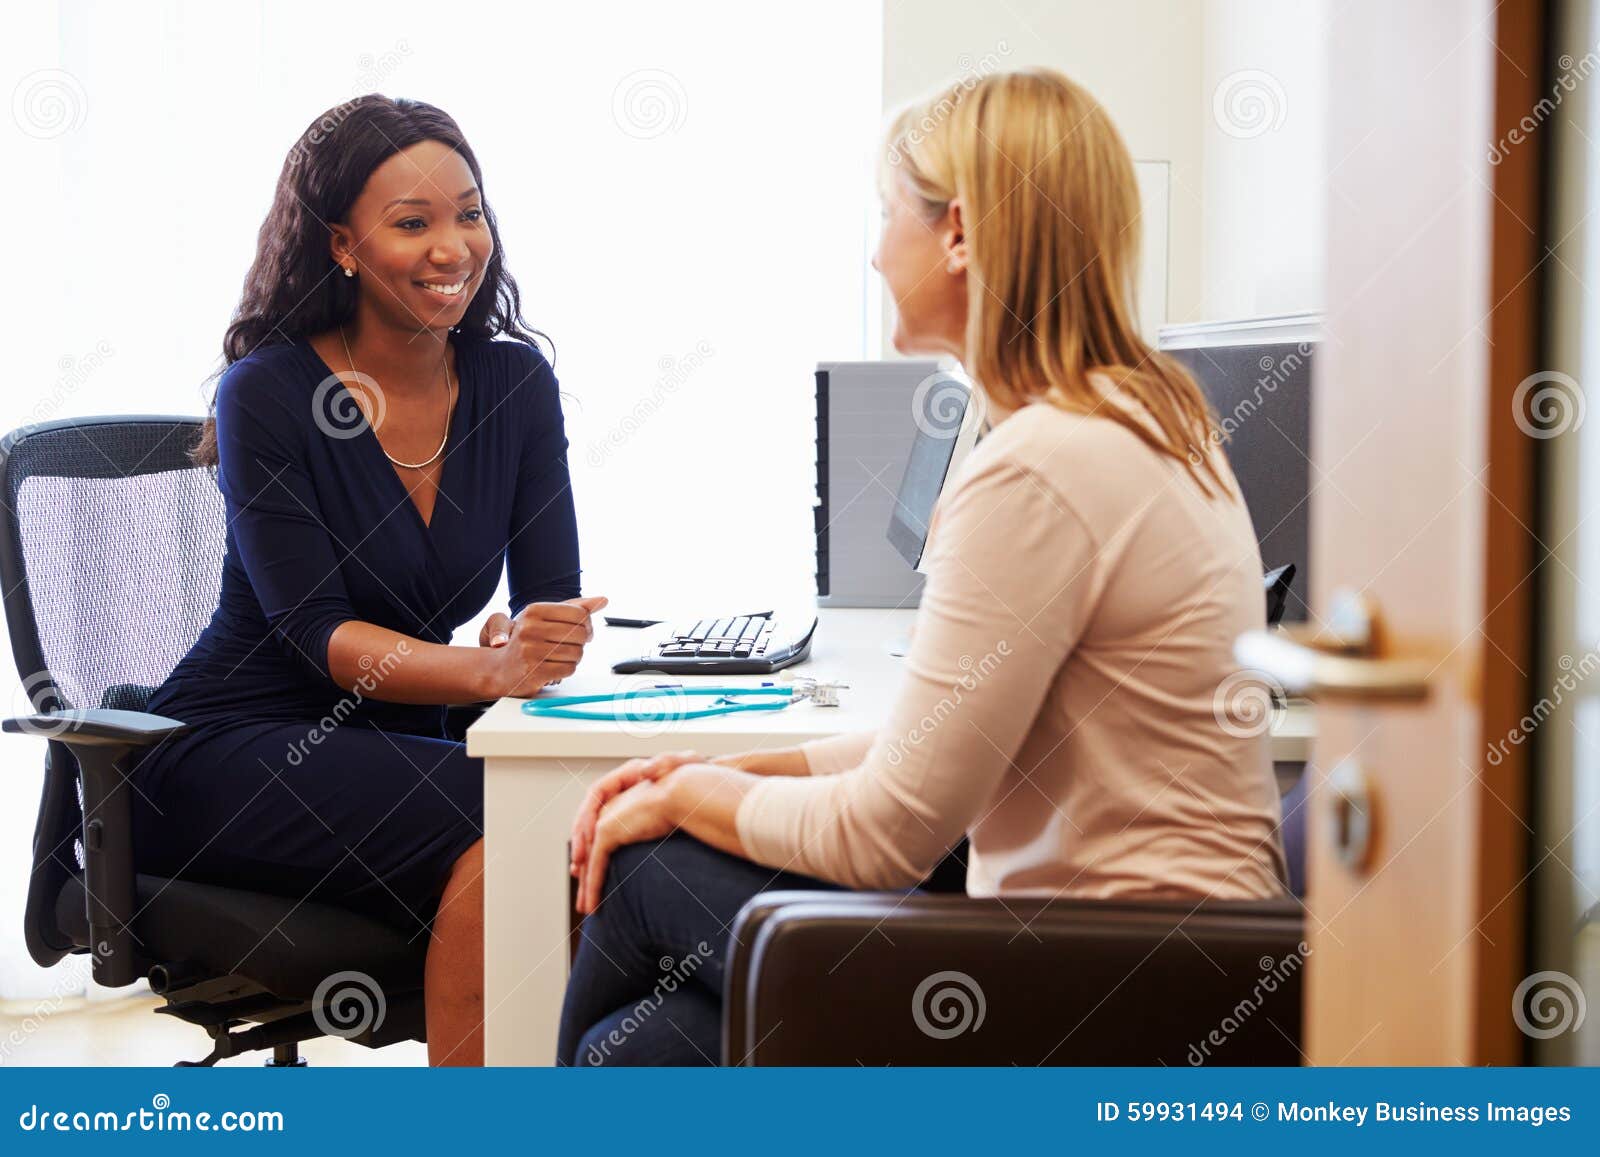 patient having consultation with female doctor in office